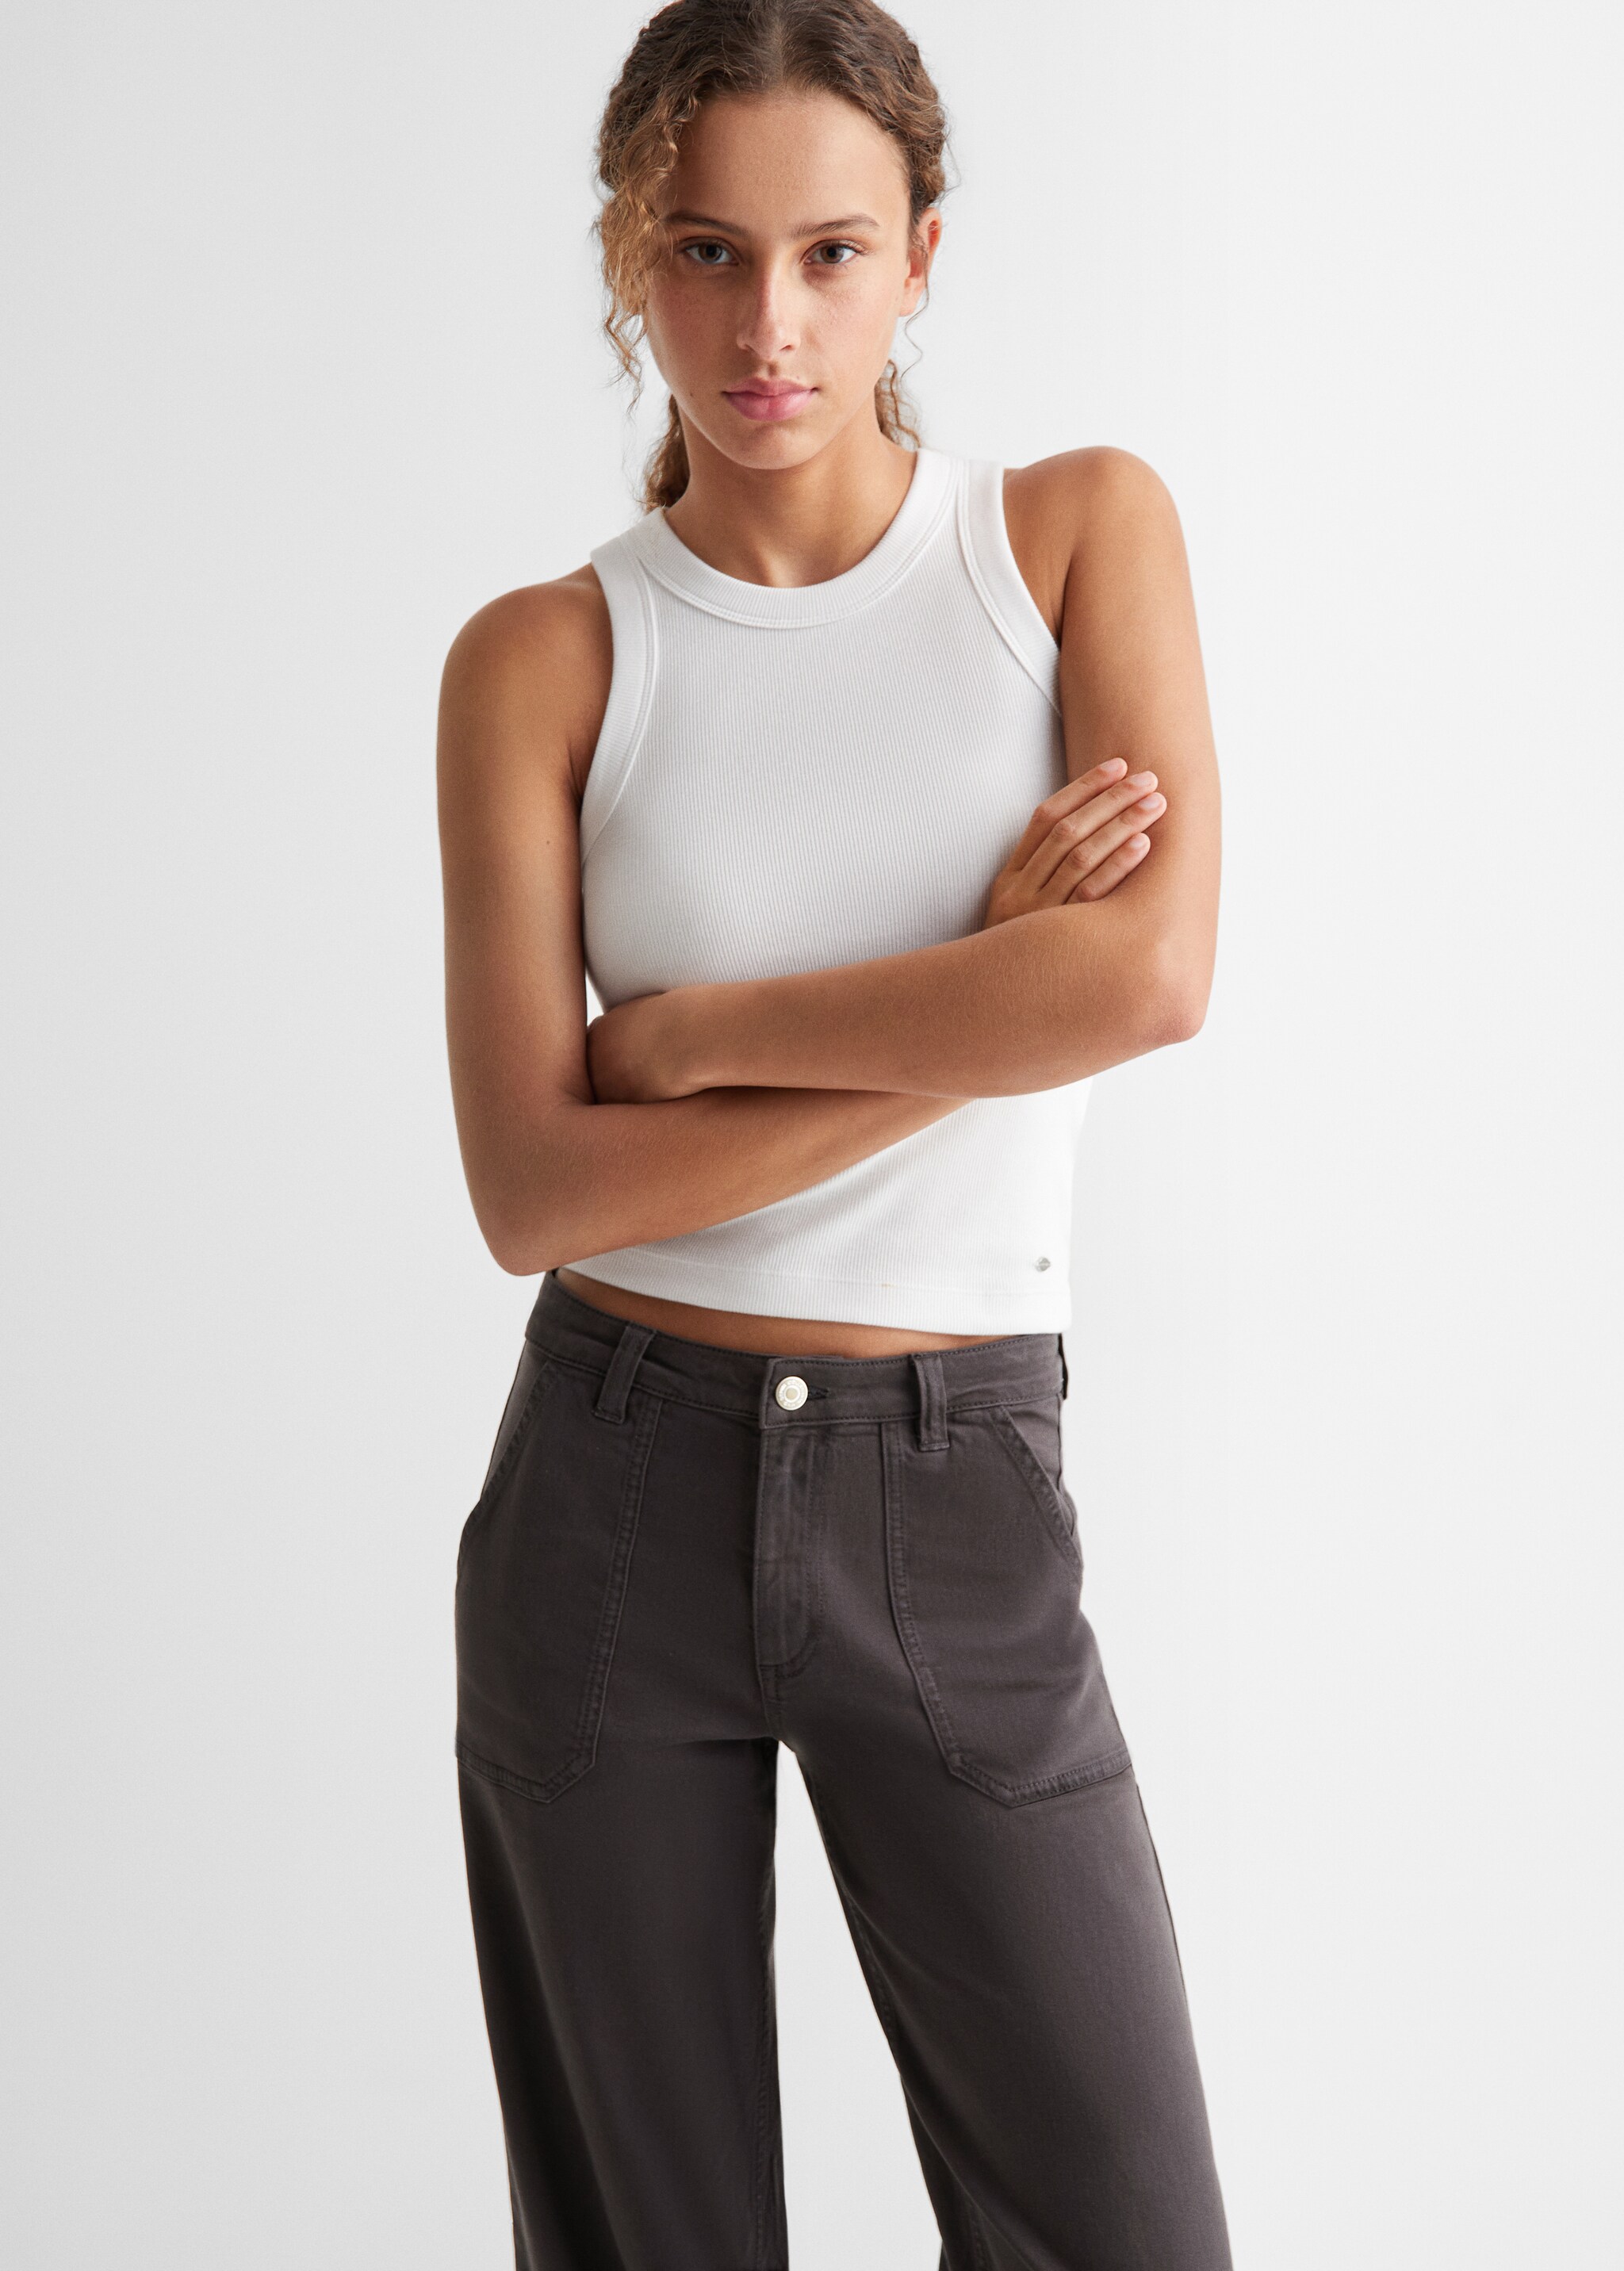 Culotte trousers with pockets - Medium plane